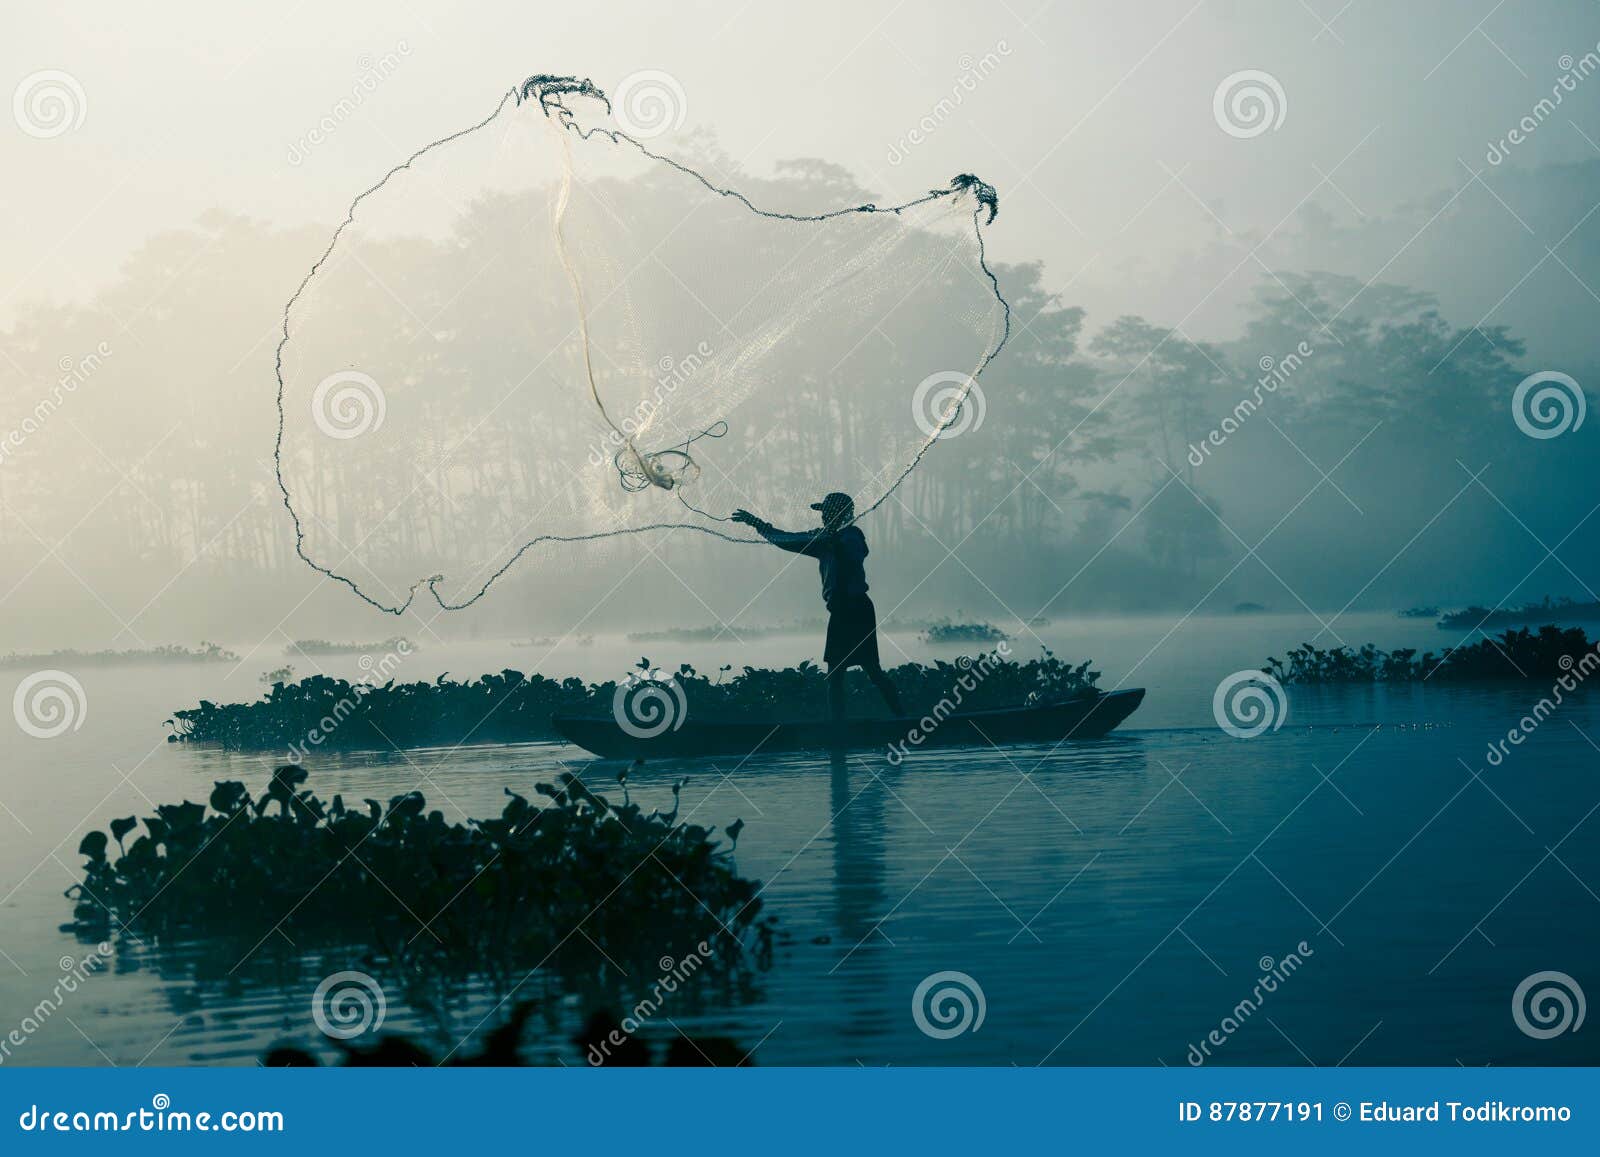 fisherman casting out his fishing net in the river.